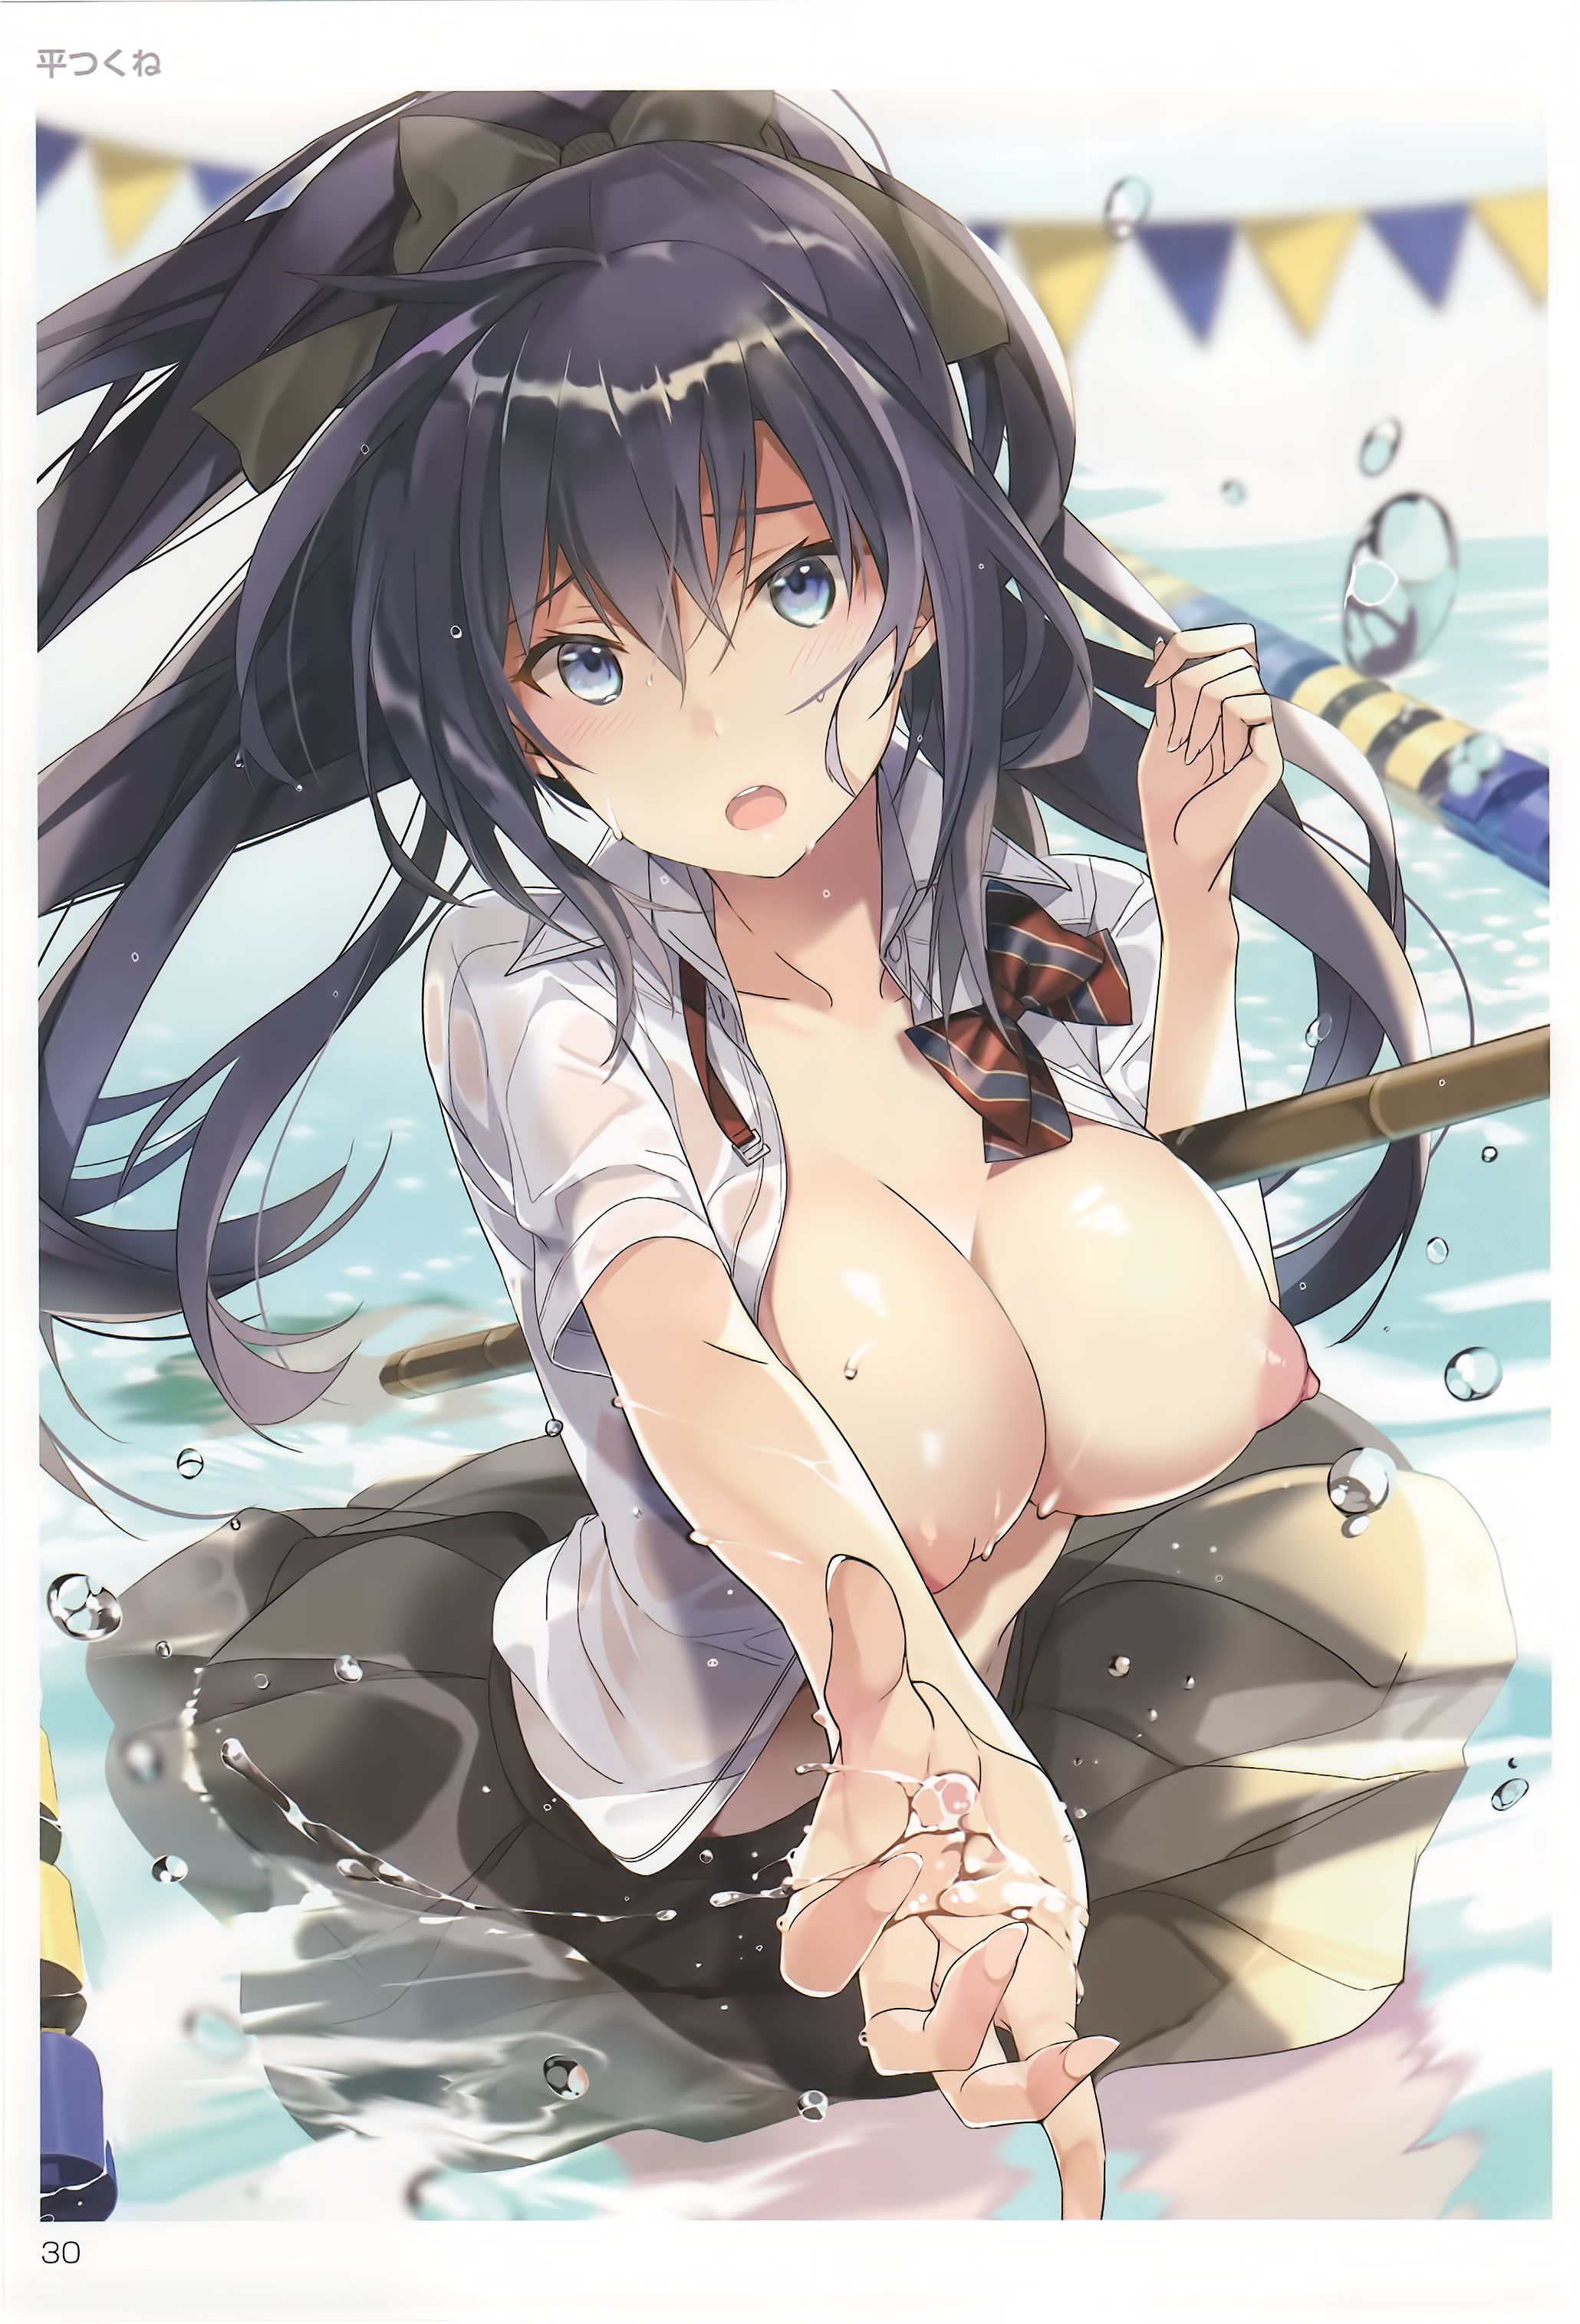 Erotic anime summary Erotic image collection of wet transparent beauties and beautiful girls that are transparent variously [50 sheets] 17